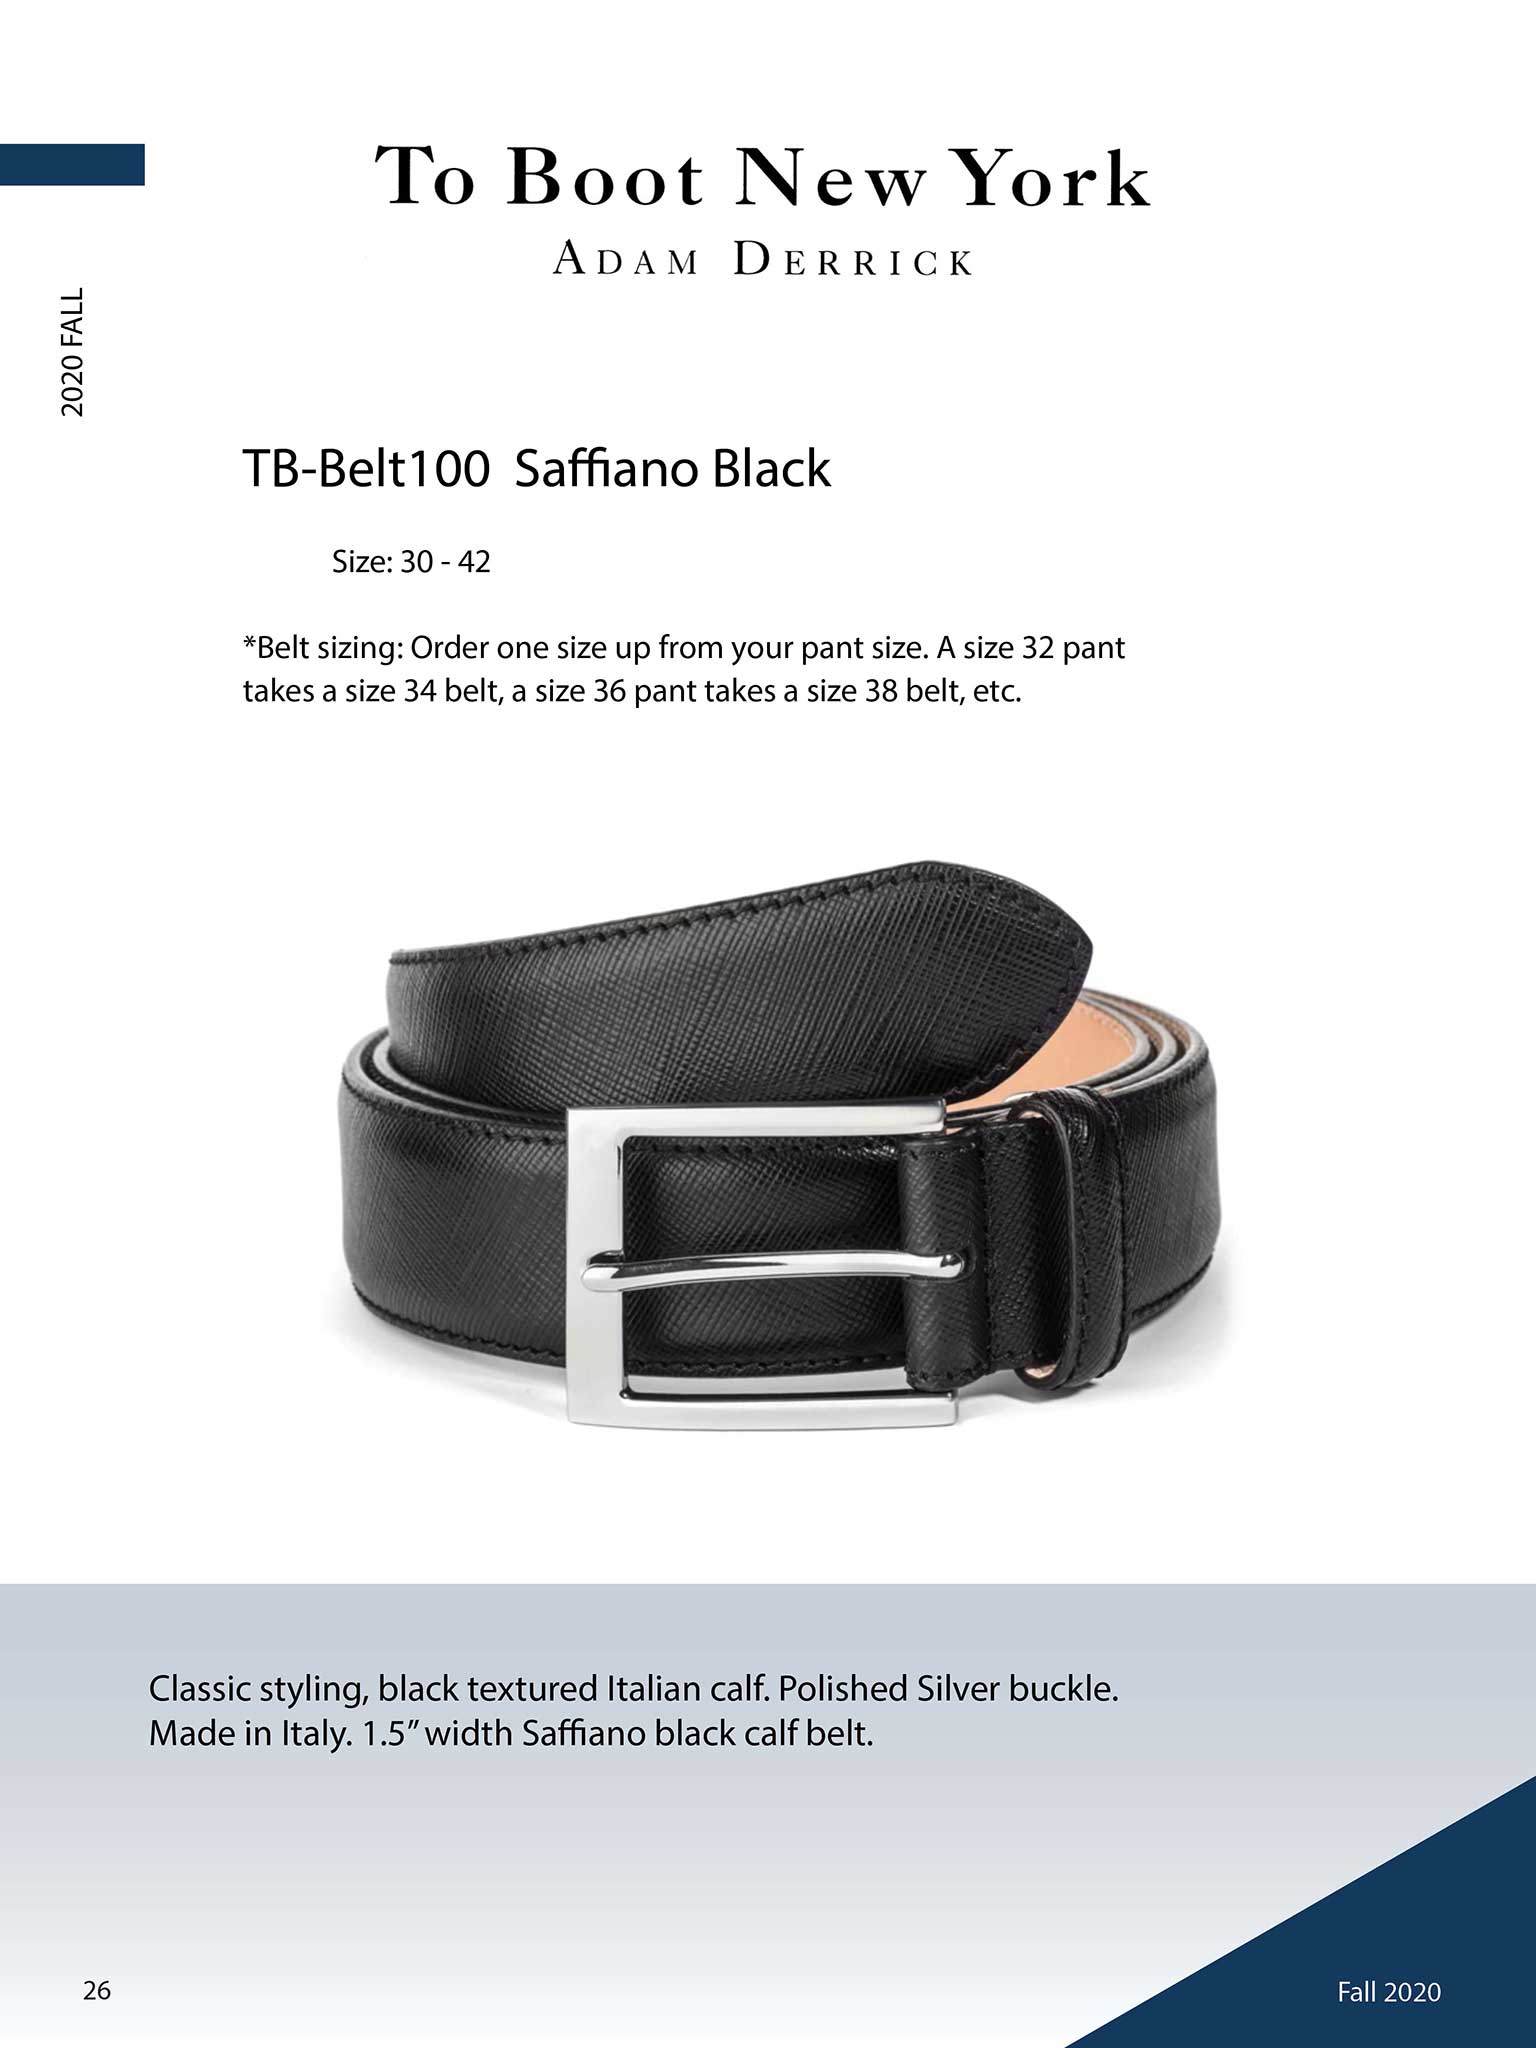 To Boot New York                                                                                                                                                                                                                                          , Saffiano Black Belt by To Boot New York